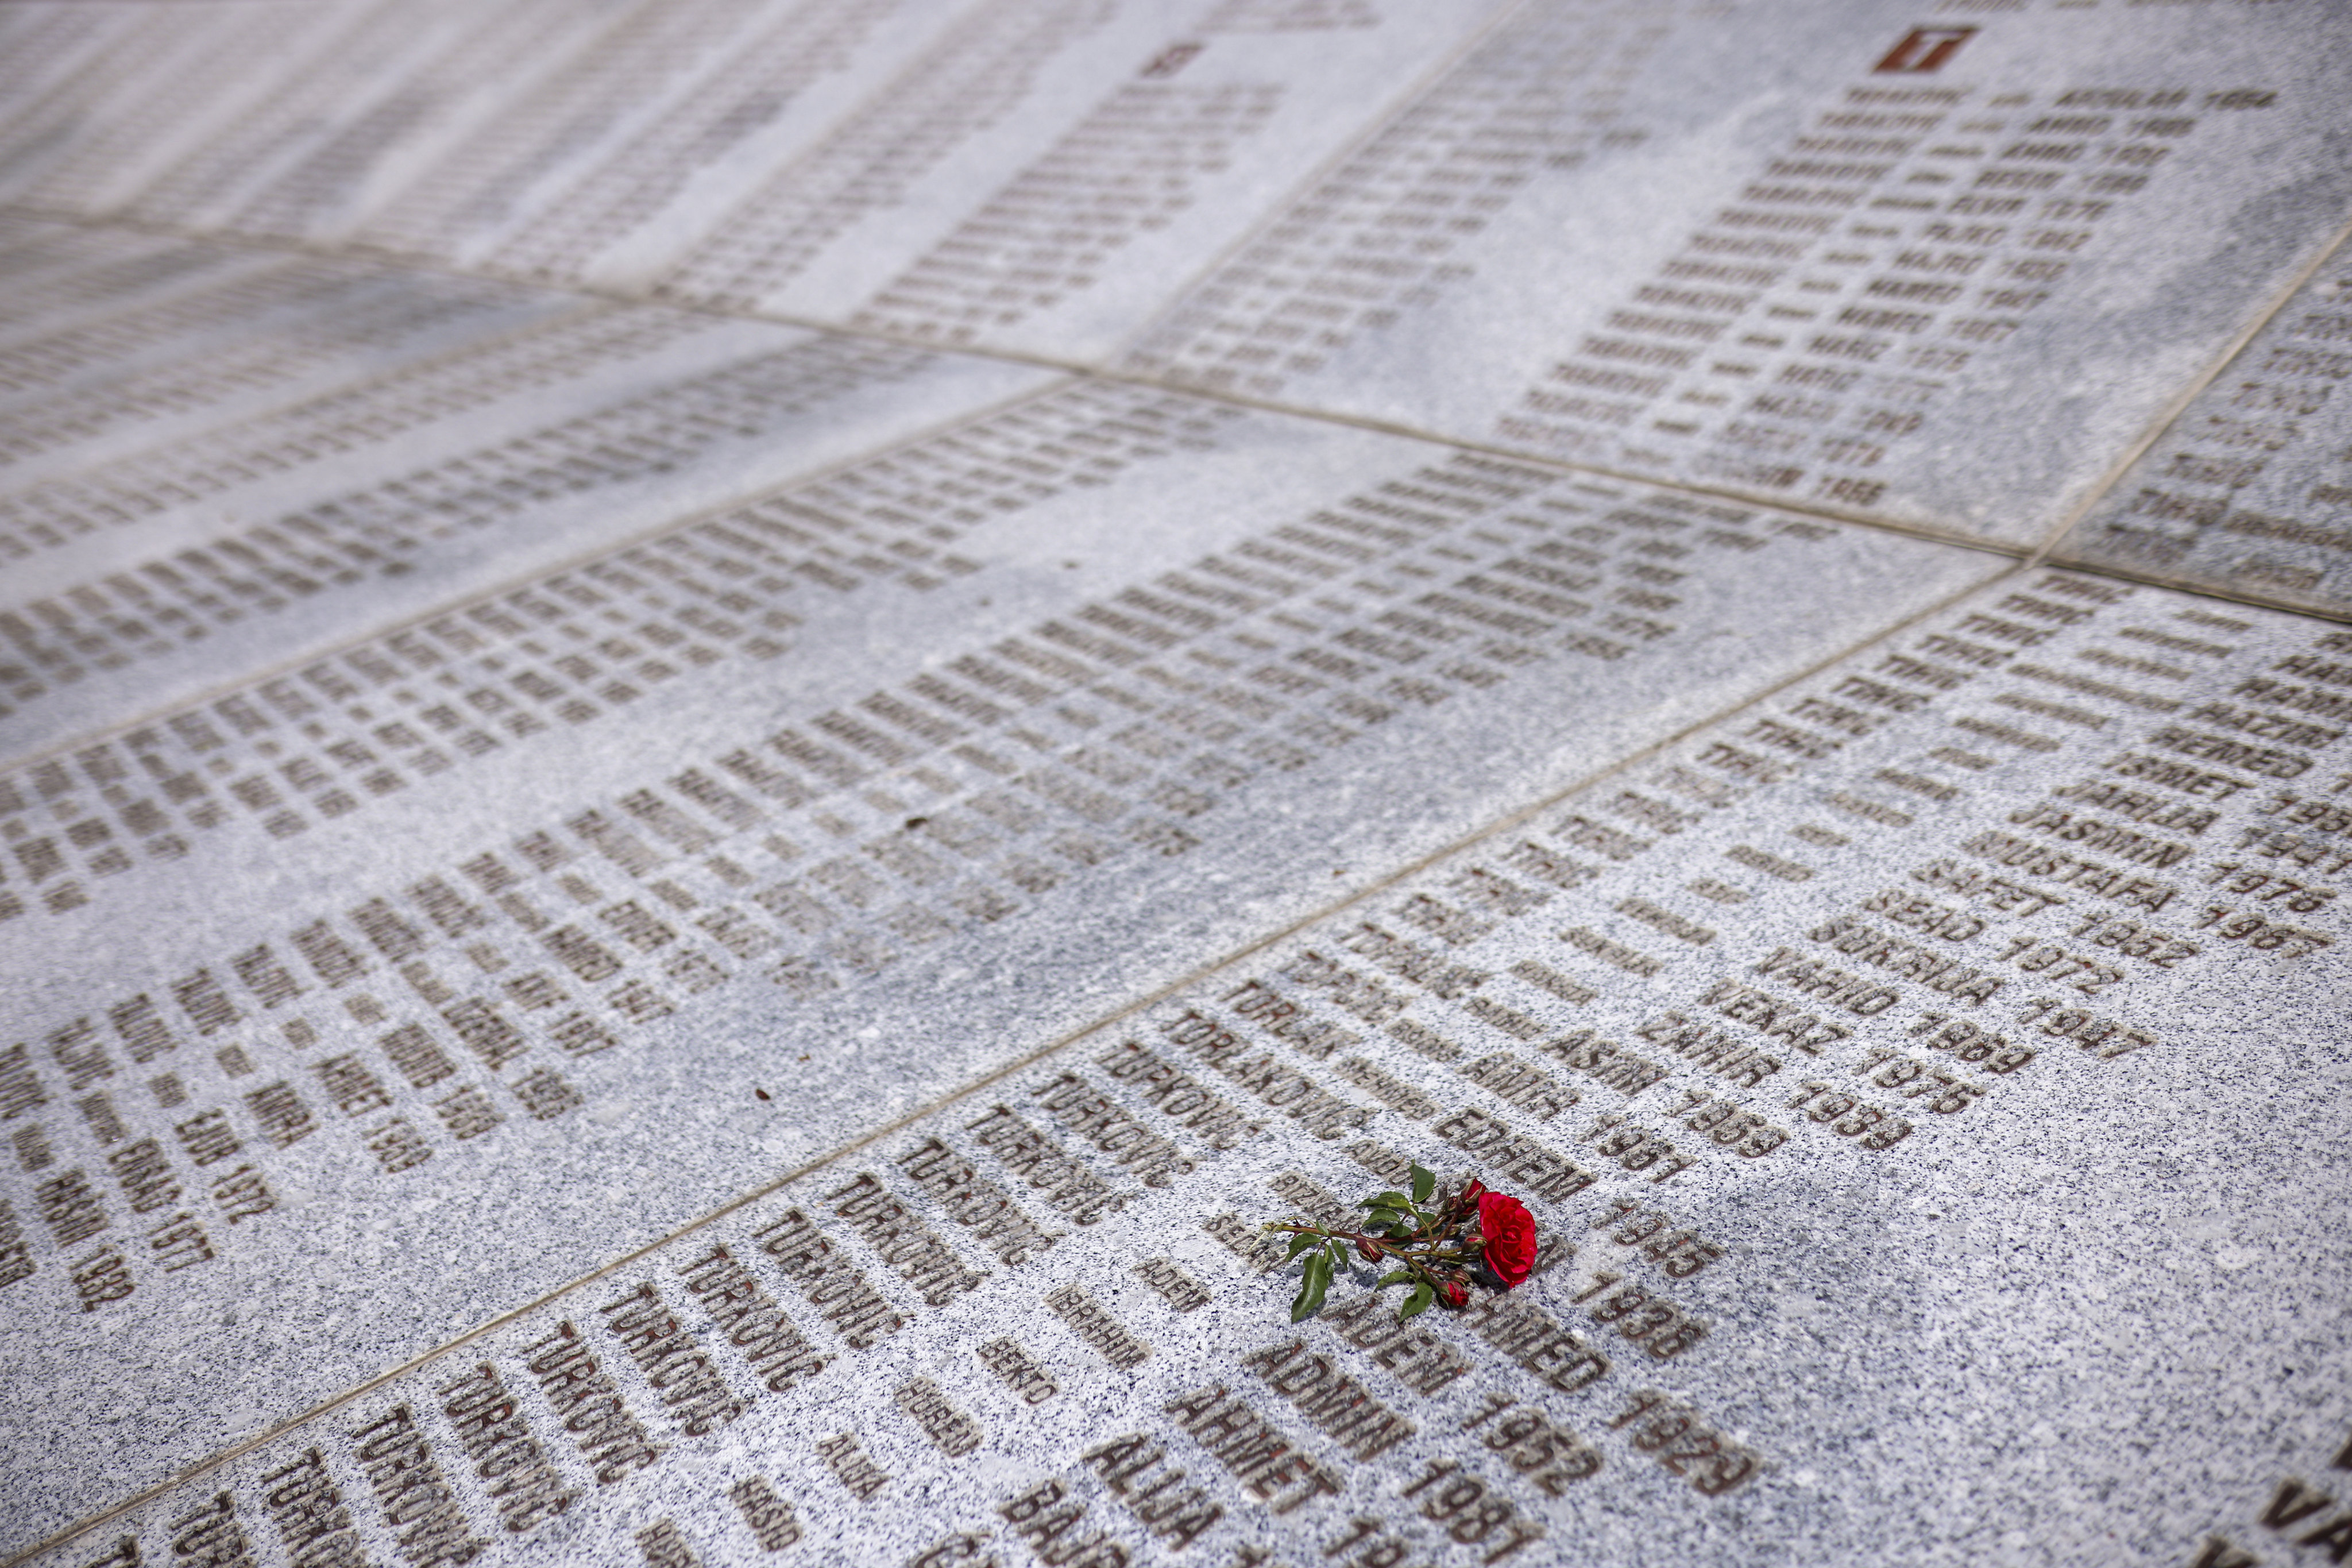 A monument with the names of those killed in Srebrenica genocide, at the Memorial Centre in Potocari, Bosnia. Photo: AP